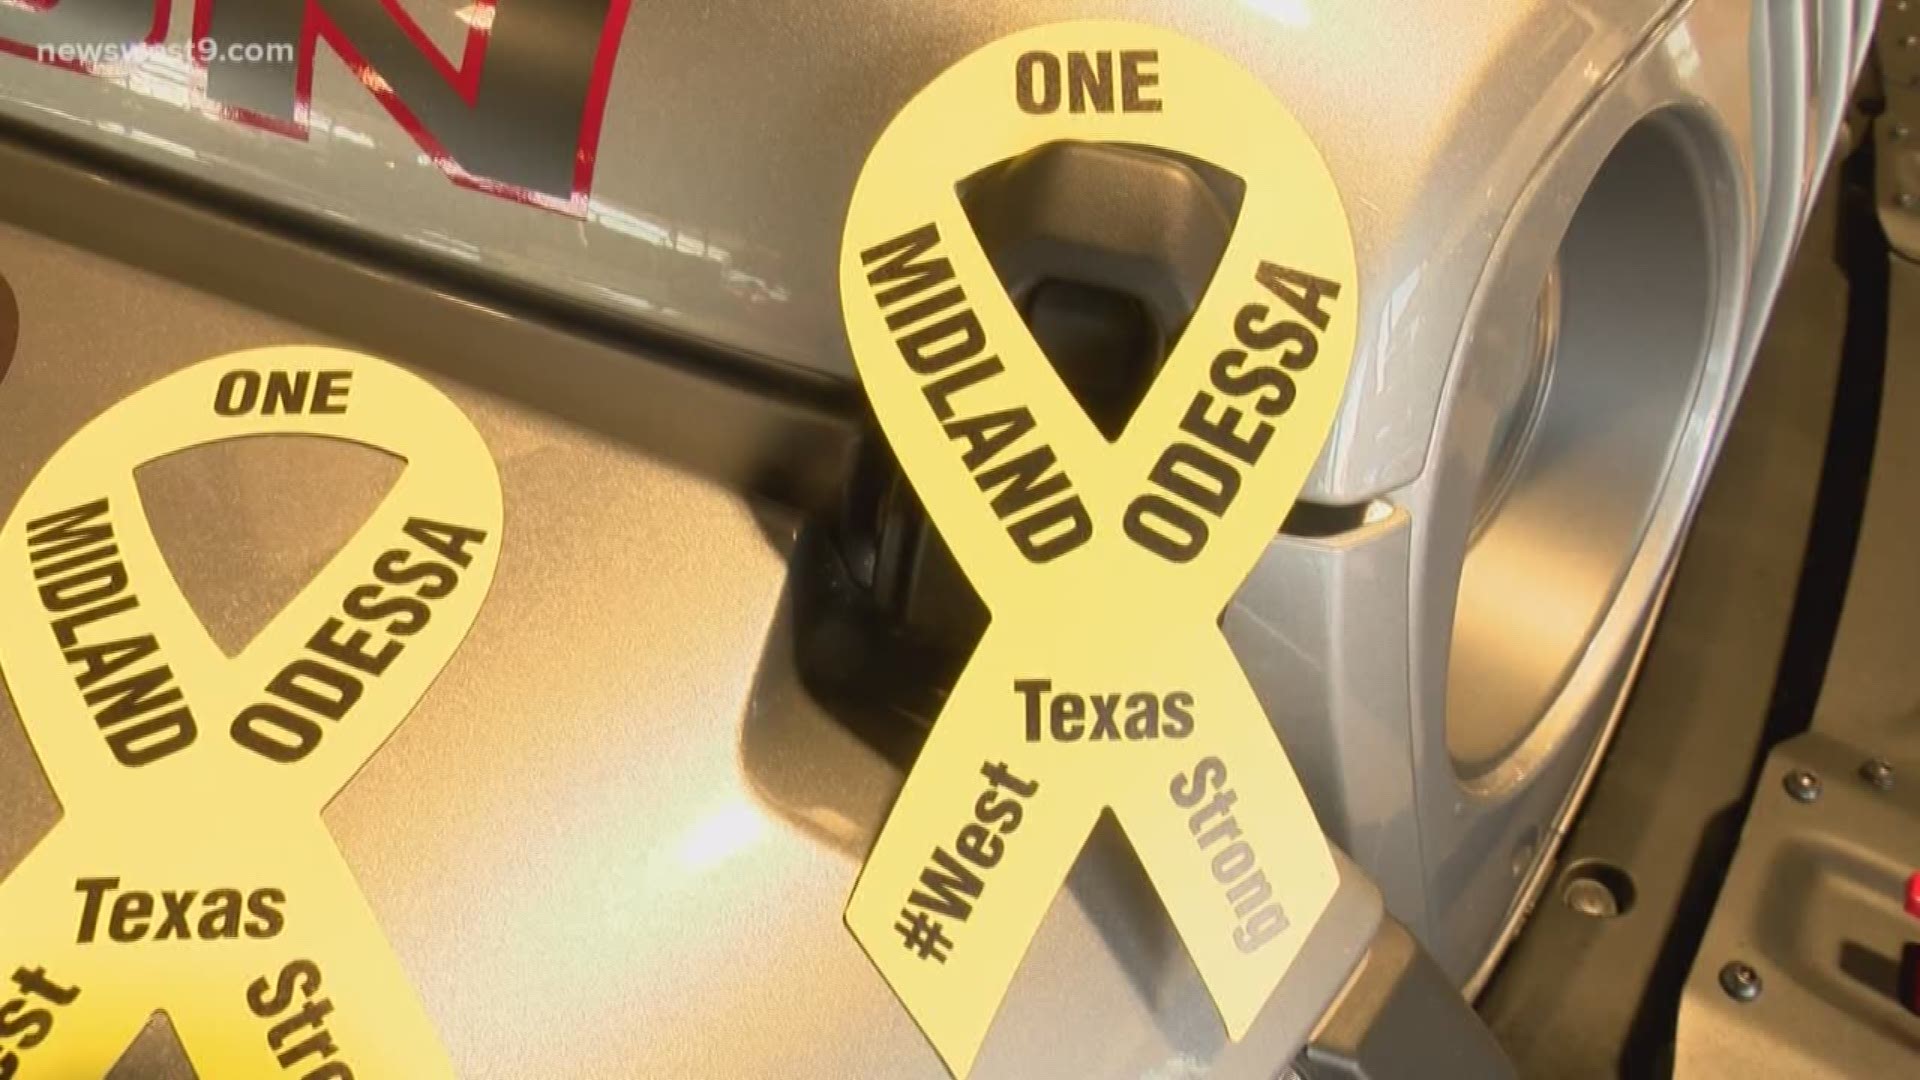 The dealerships will be giving away free car magnets that say "One Midland Odessa".